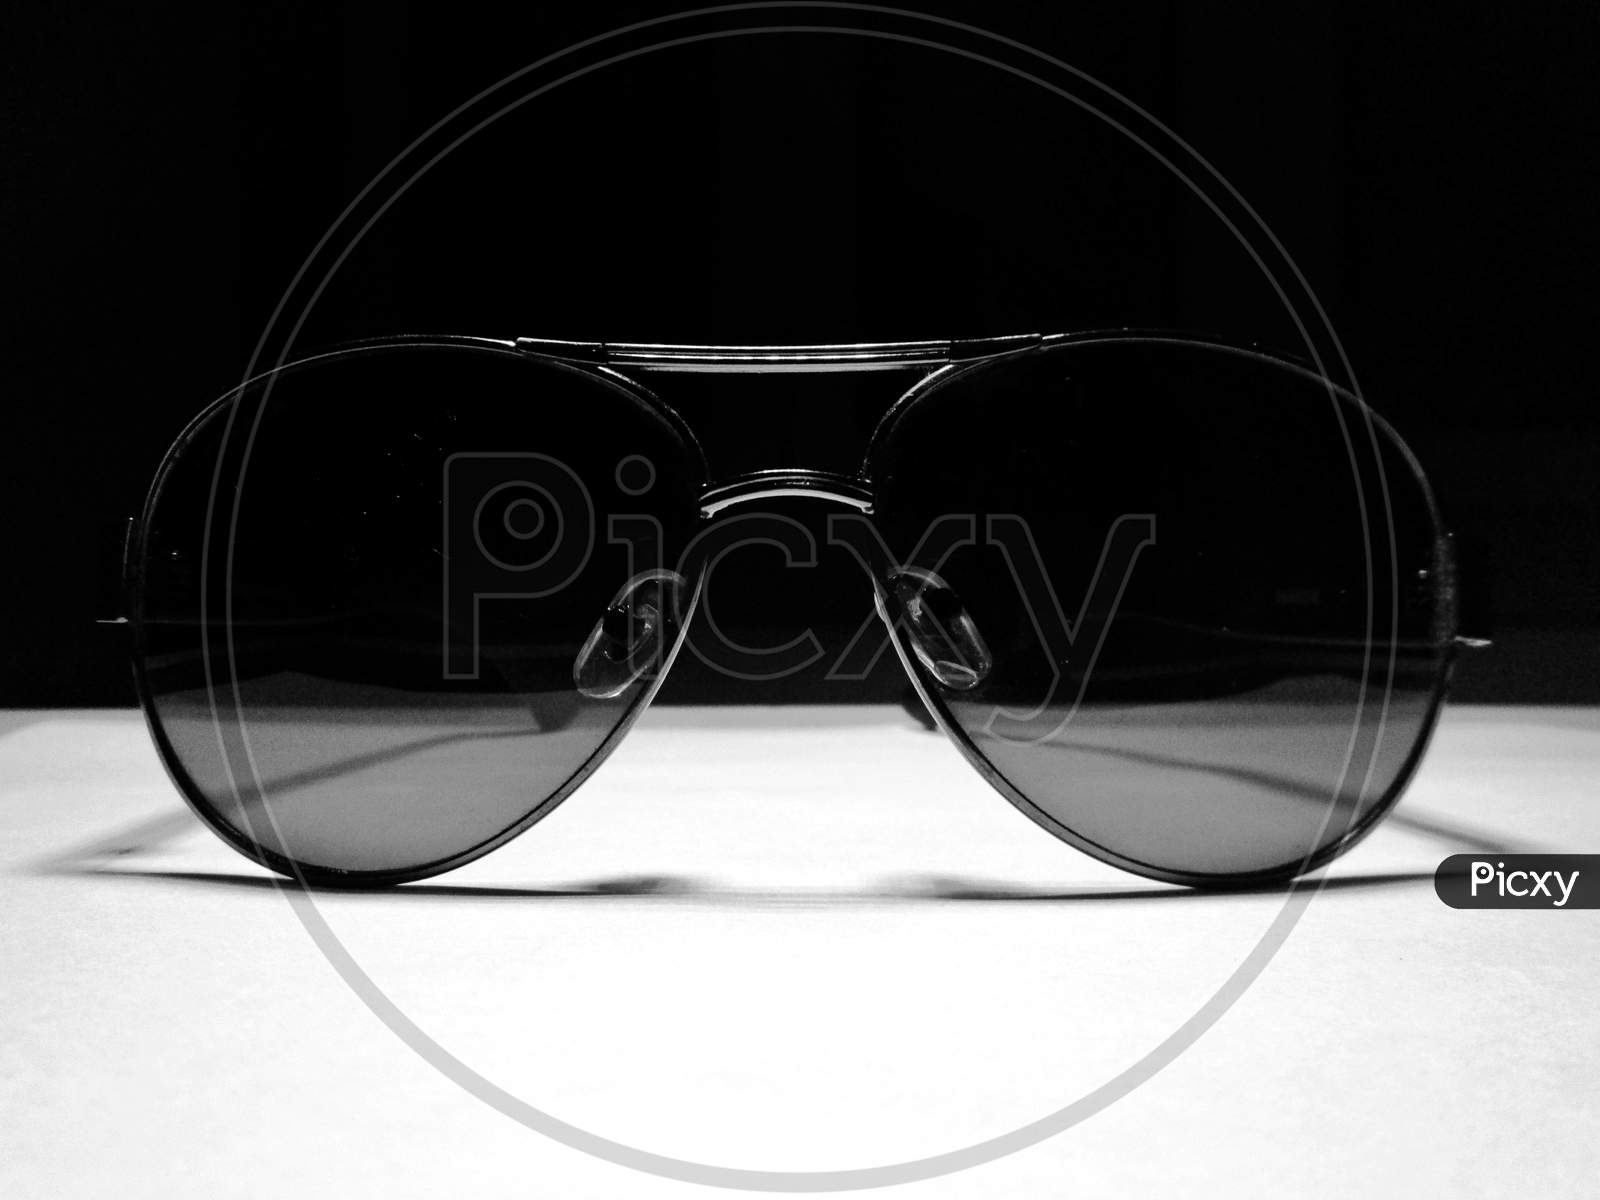 Sunglass Photography, product Photography